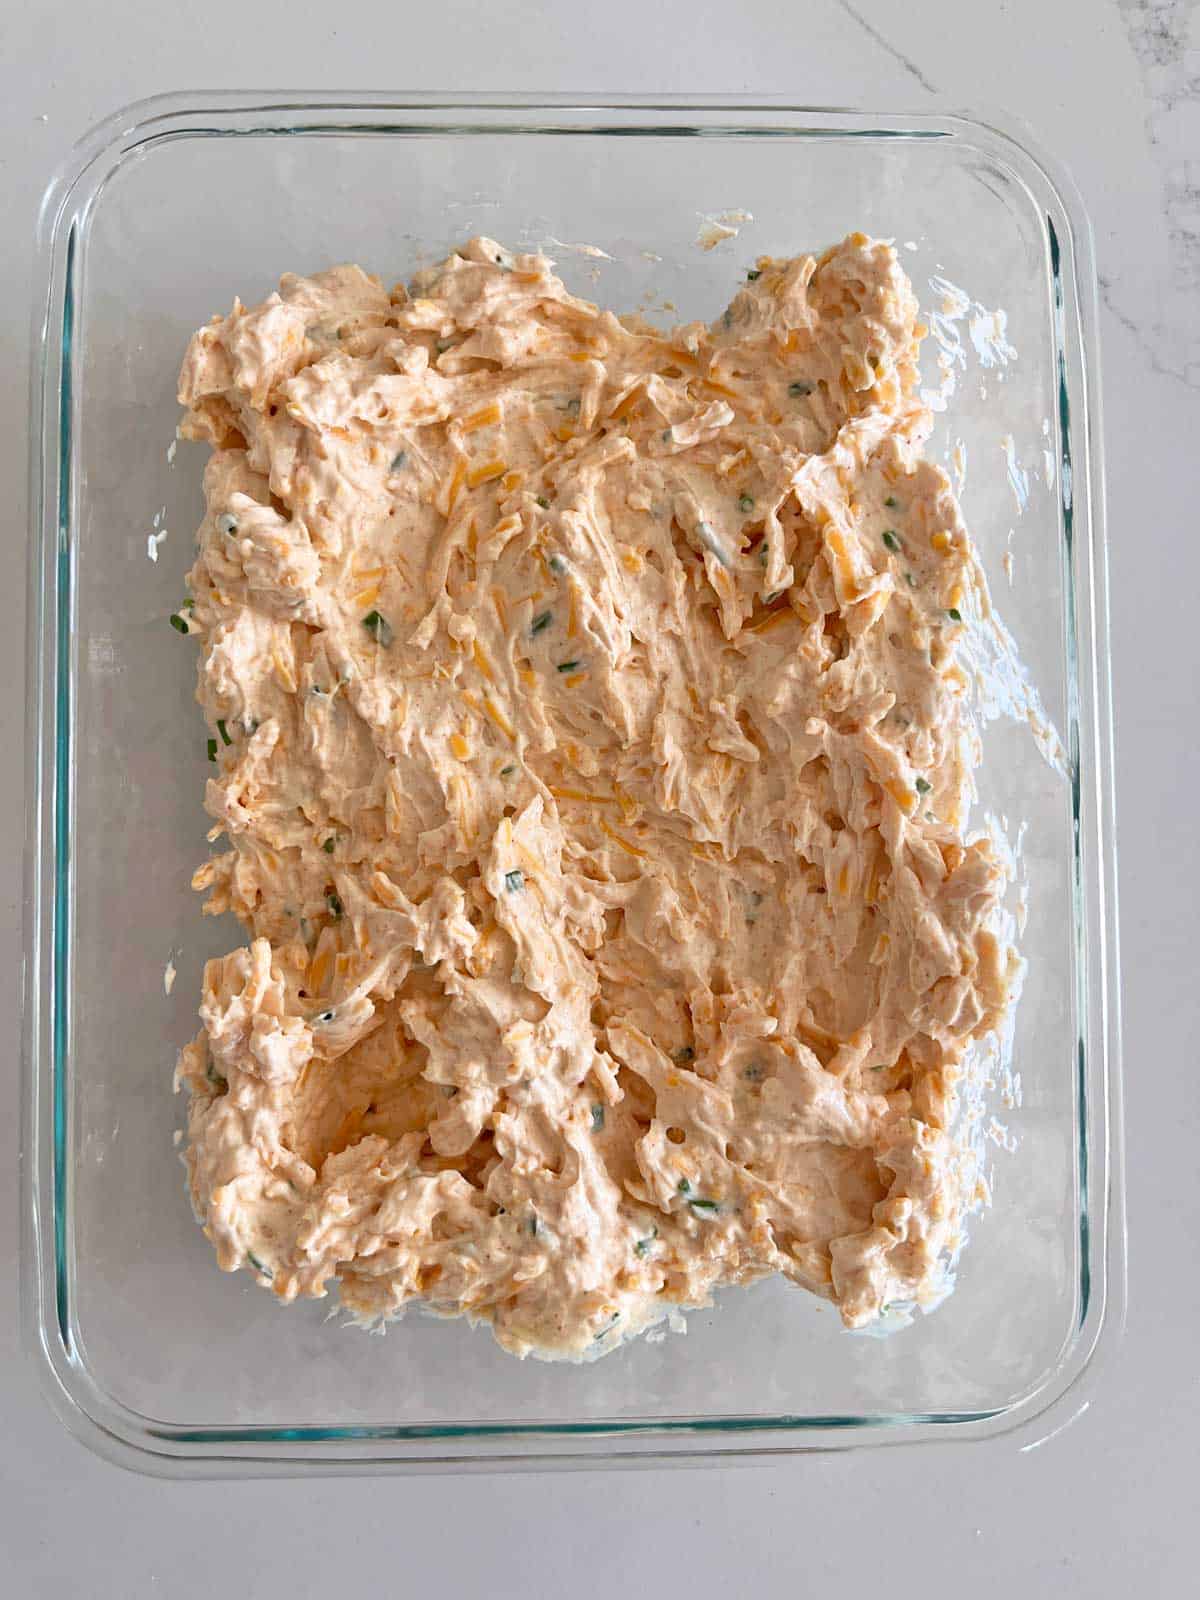 Leftovers of cream cheese dip are stored in a glass food storage container.